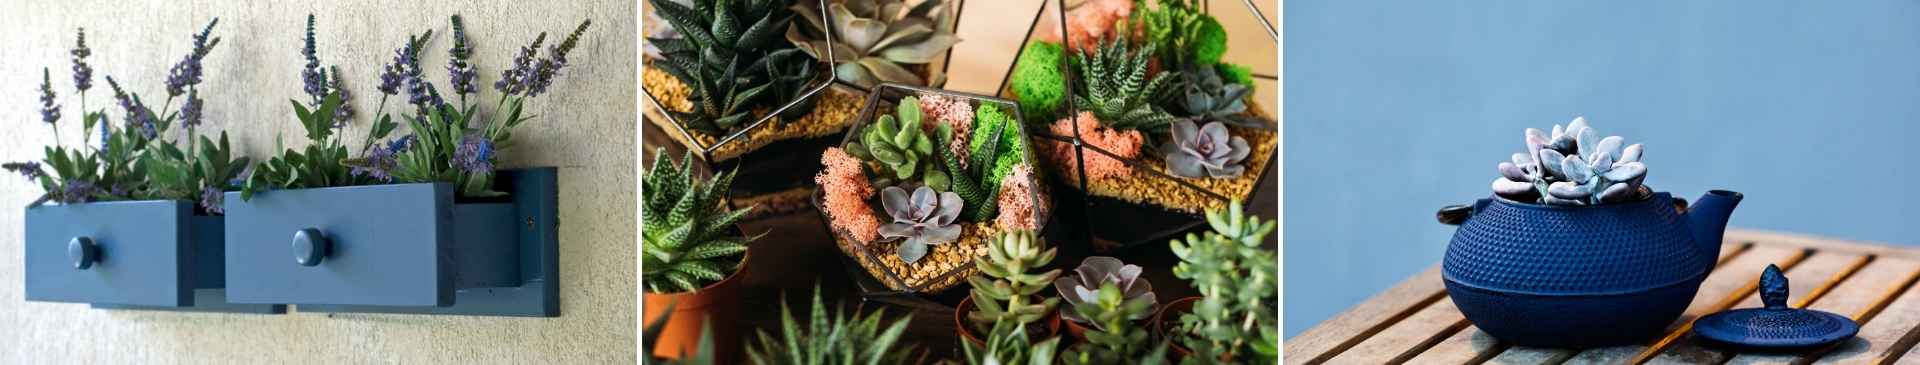 Crafty Containers: Unusual Alternatives to Conventional Pots